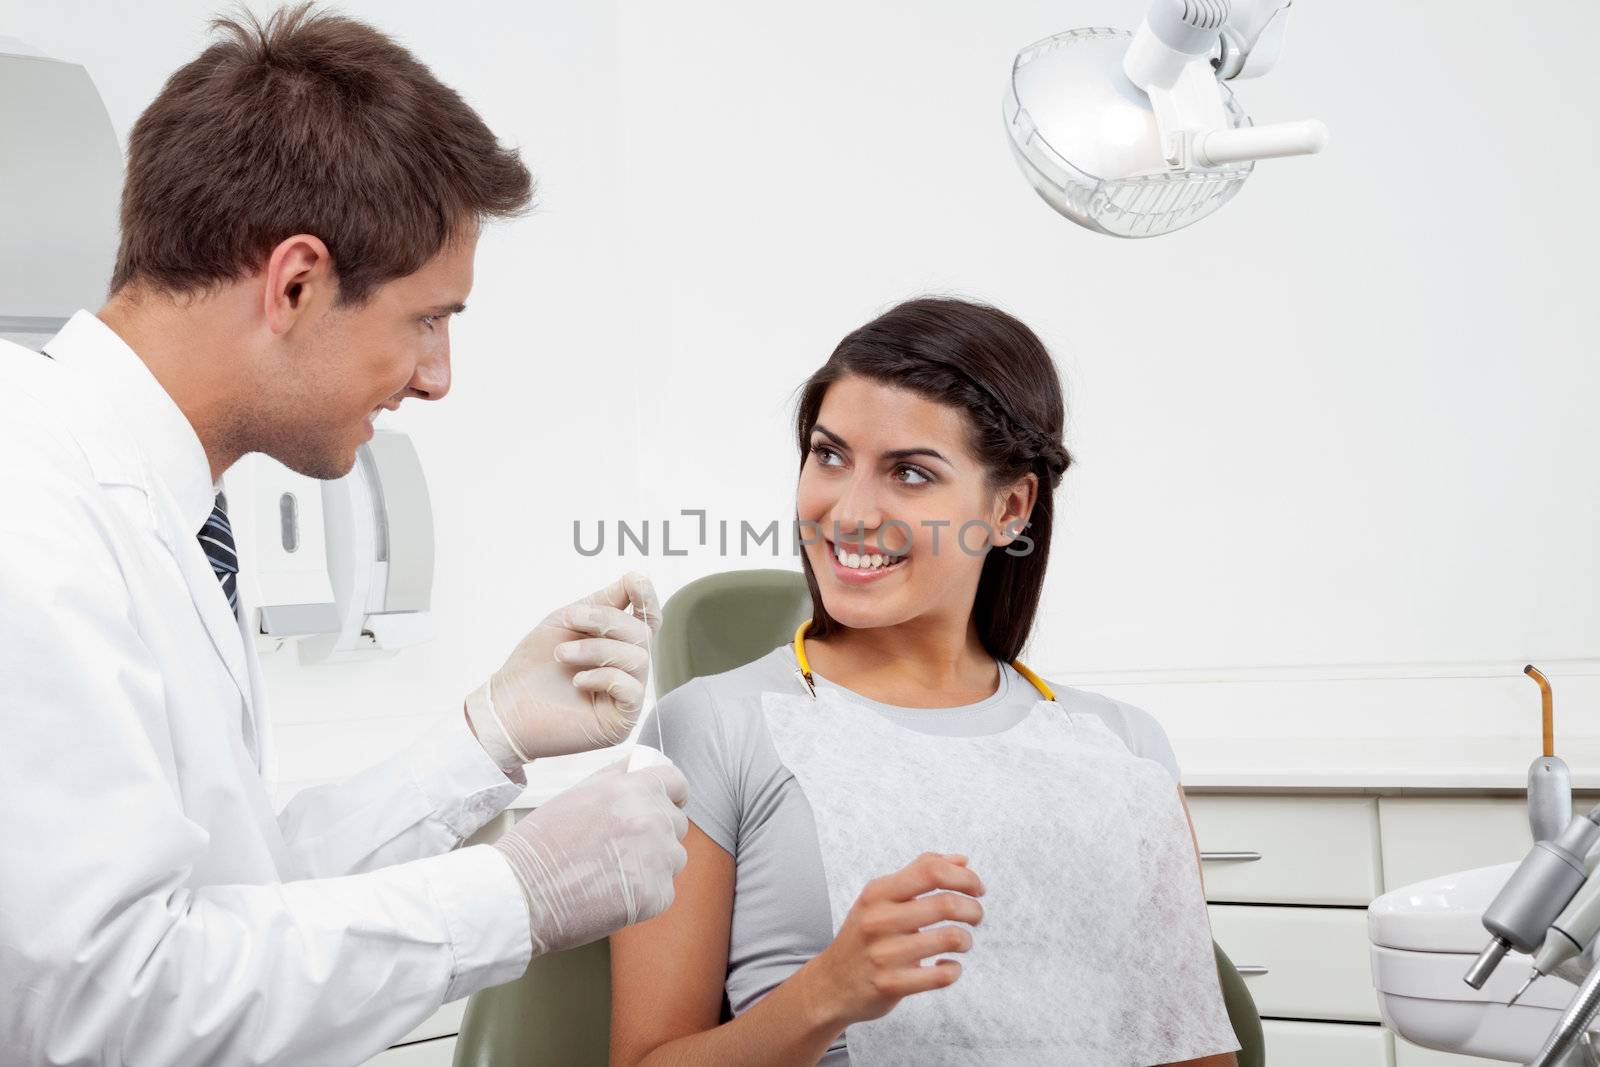 Dentist Holding Thread While Patient Looking At Him by leaf